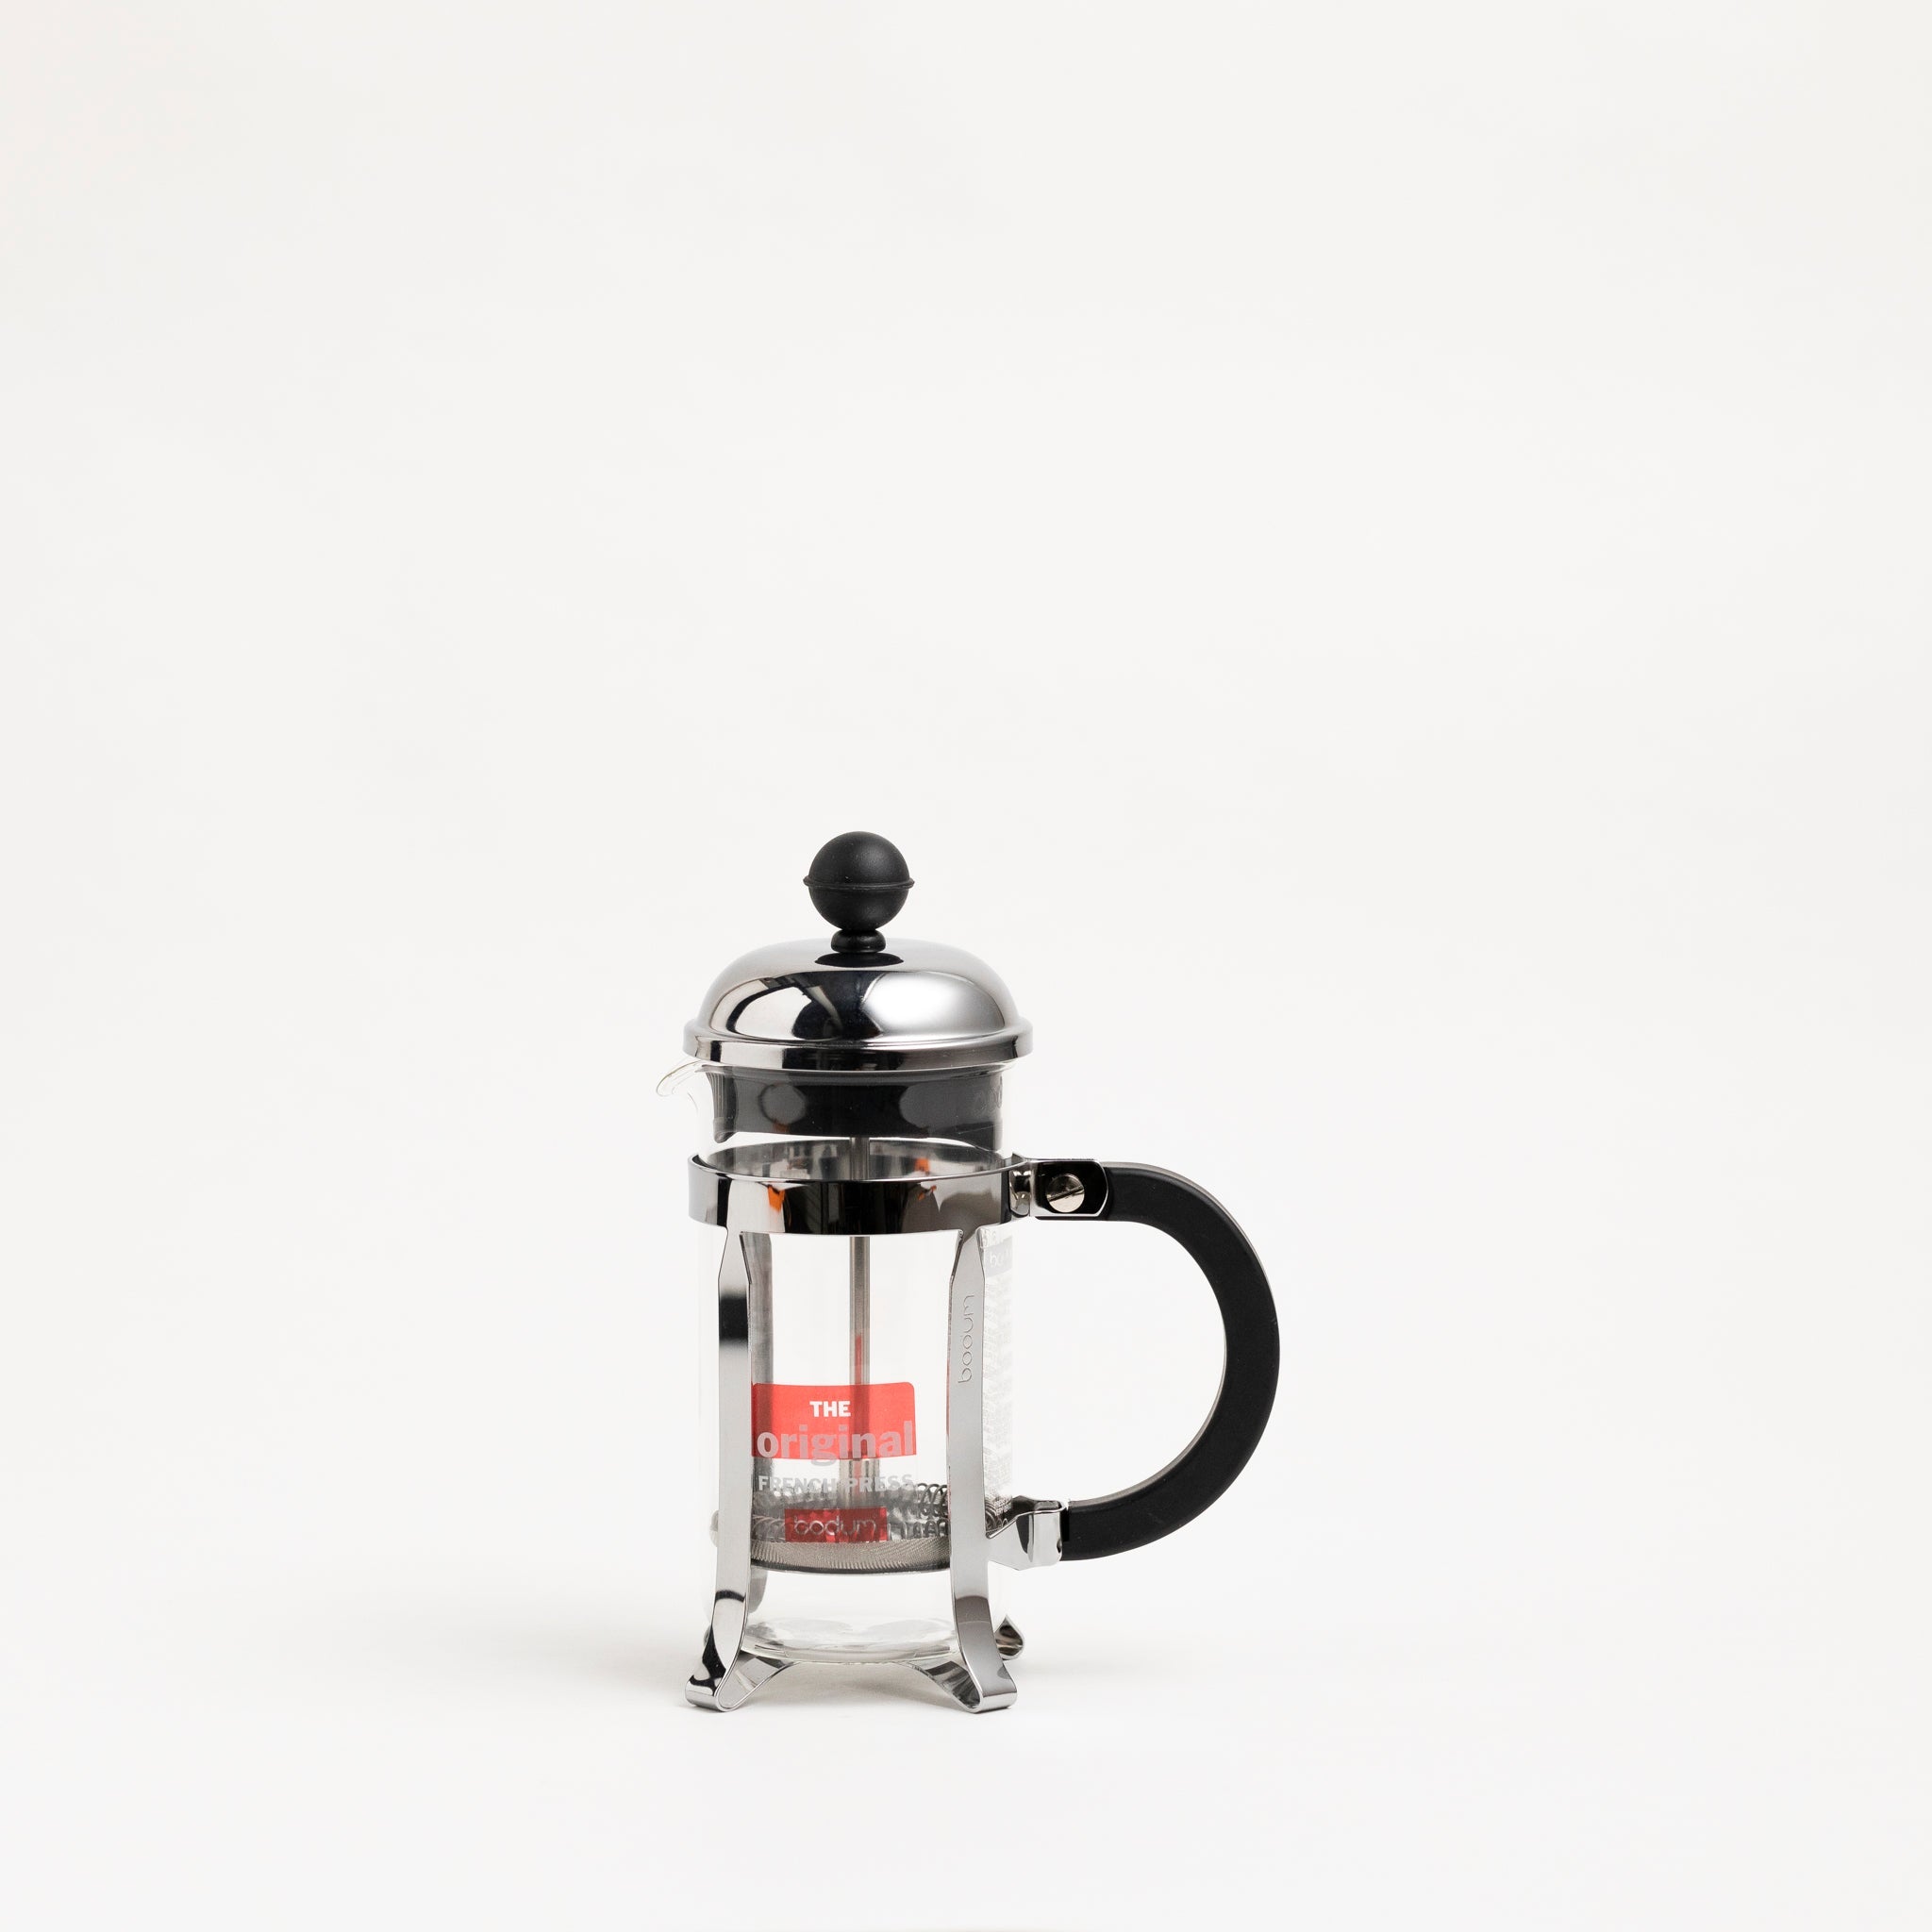 French Press Plunger (3 Cup) - Will & Co Coffee